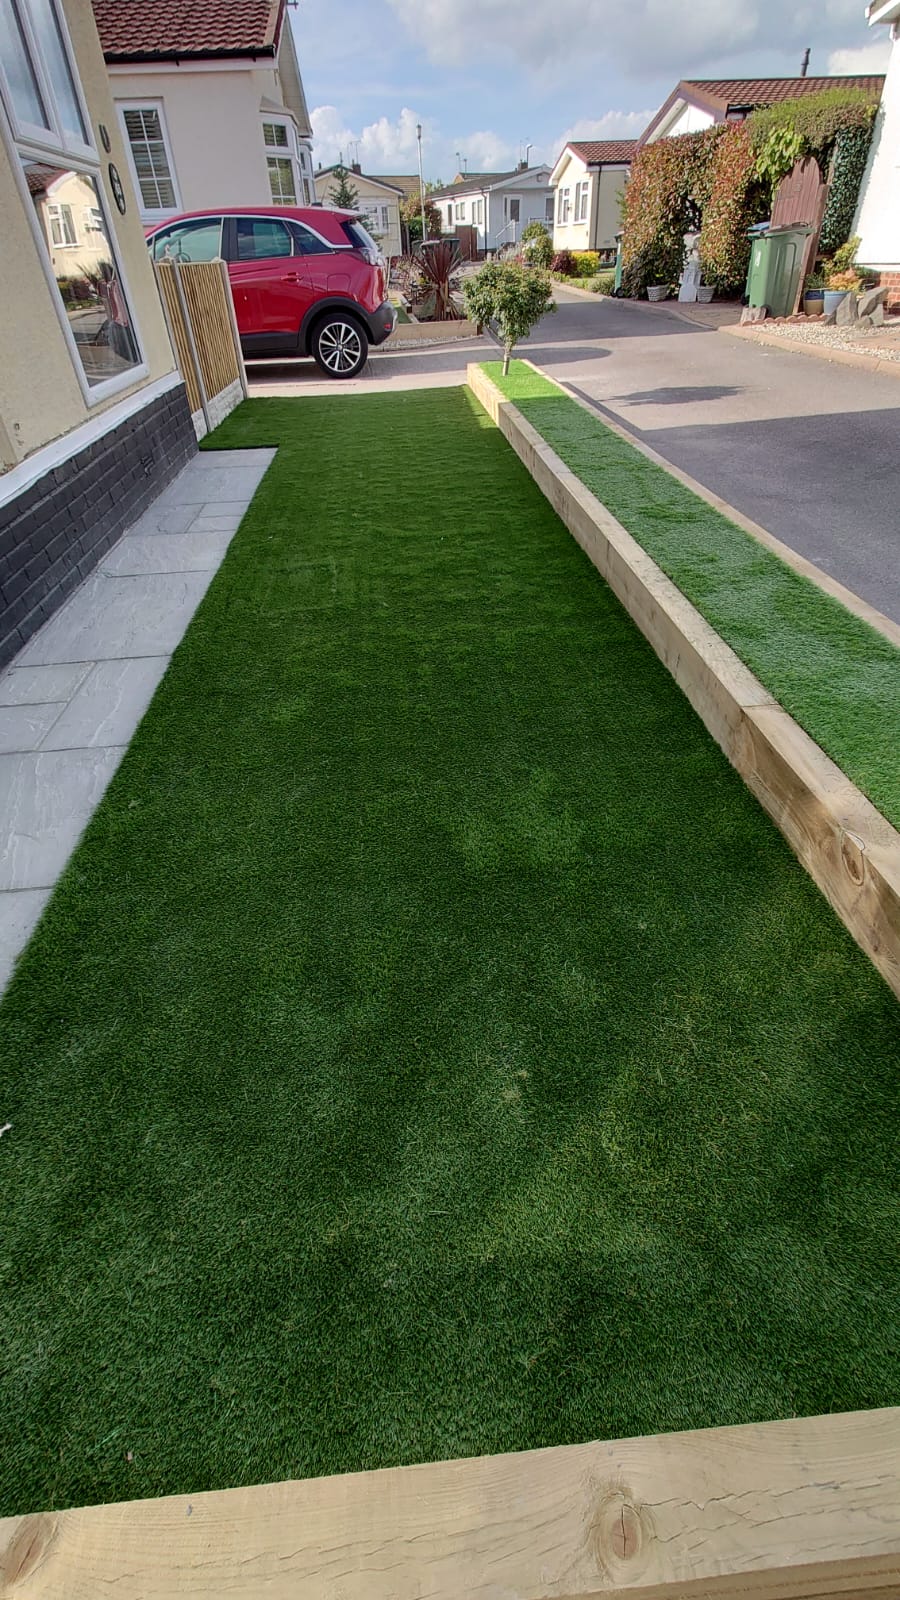 DNA Landscapes Coventry - front garden fitted with artificial grass